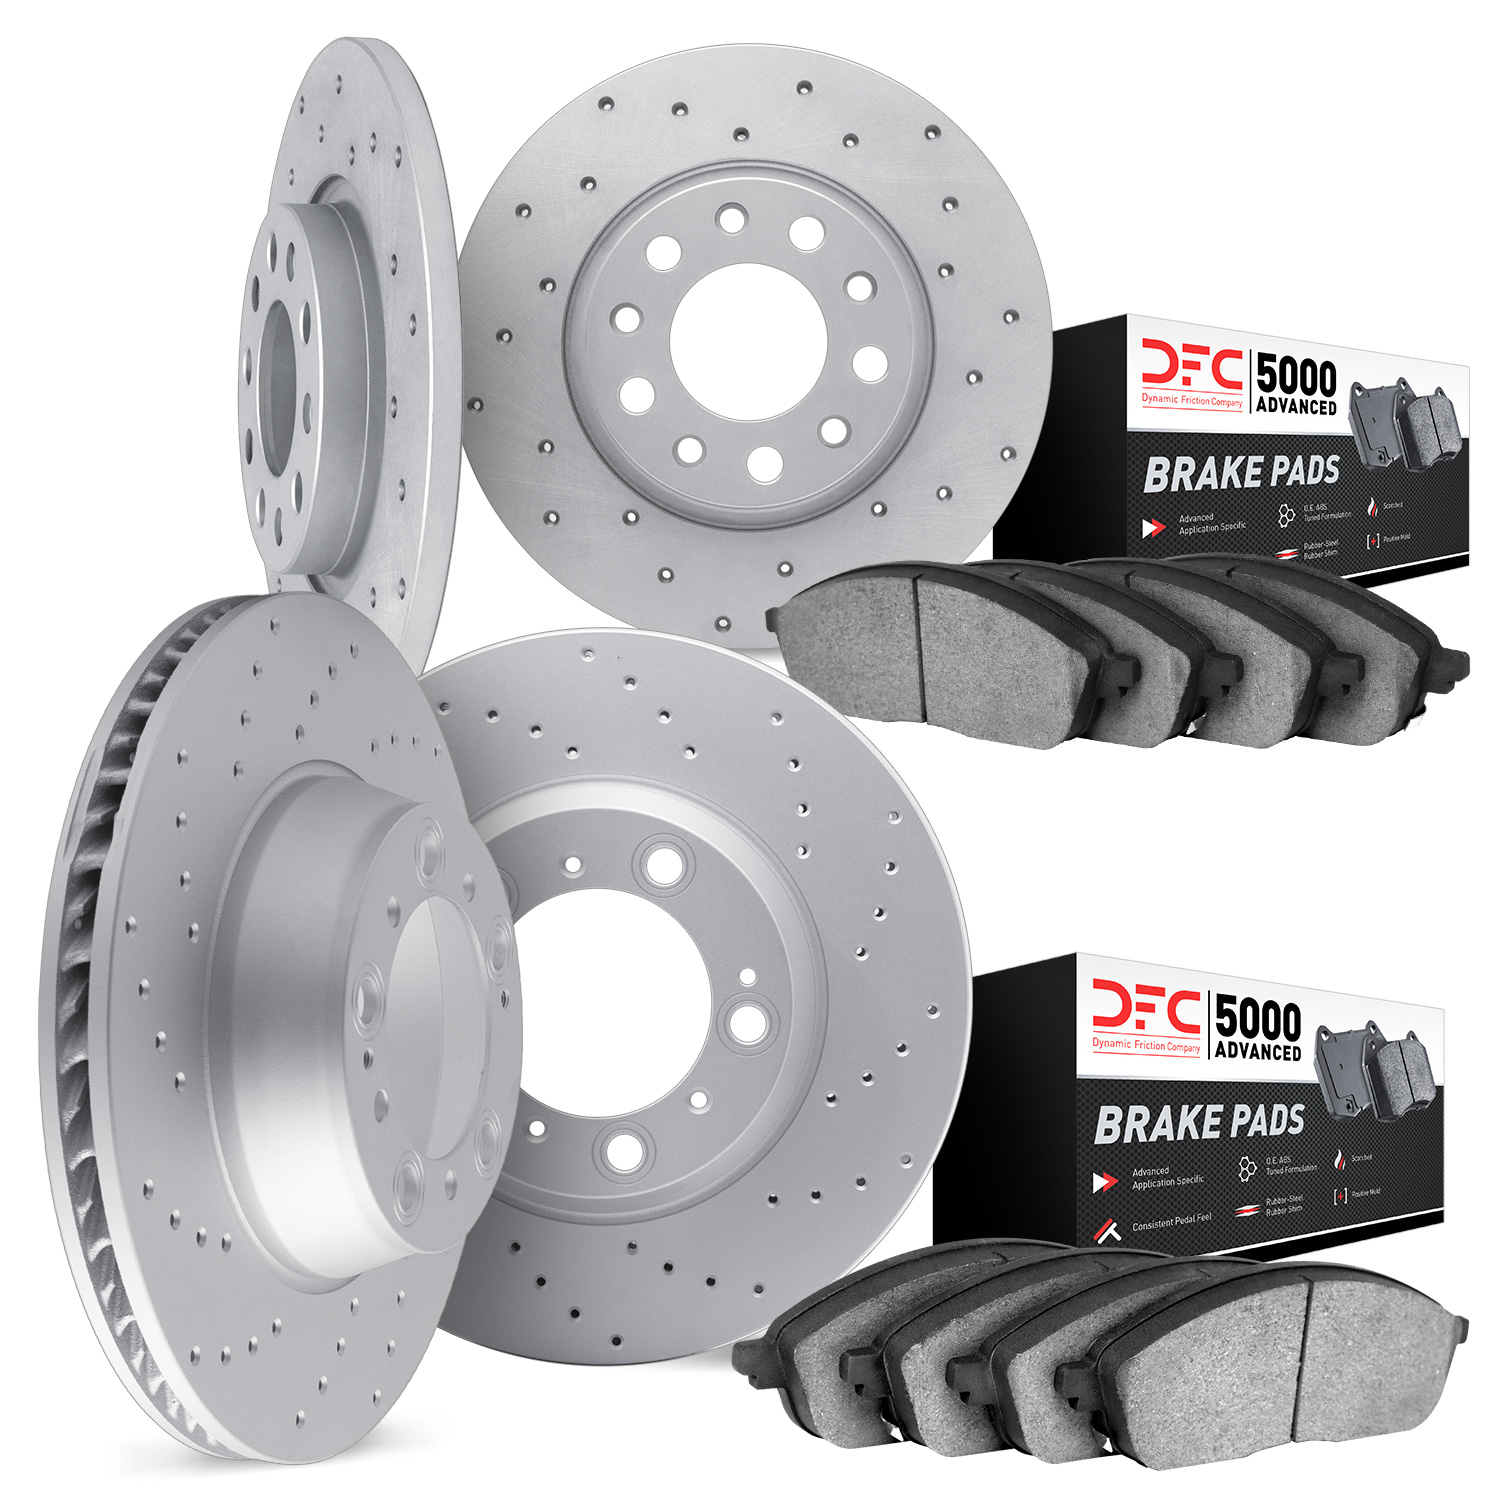 2704-59045 Geoperformance Drilled Brake Rotors with Active Performance Pads Kit, 2003-2007 Acura/Honda, Position: Front and Rear